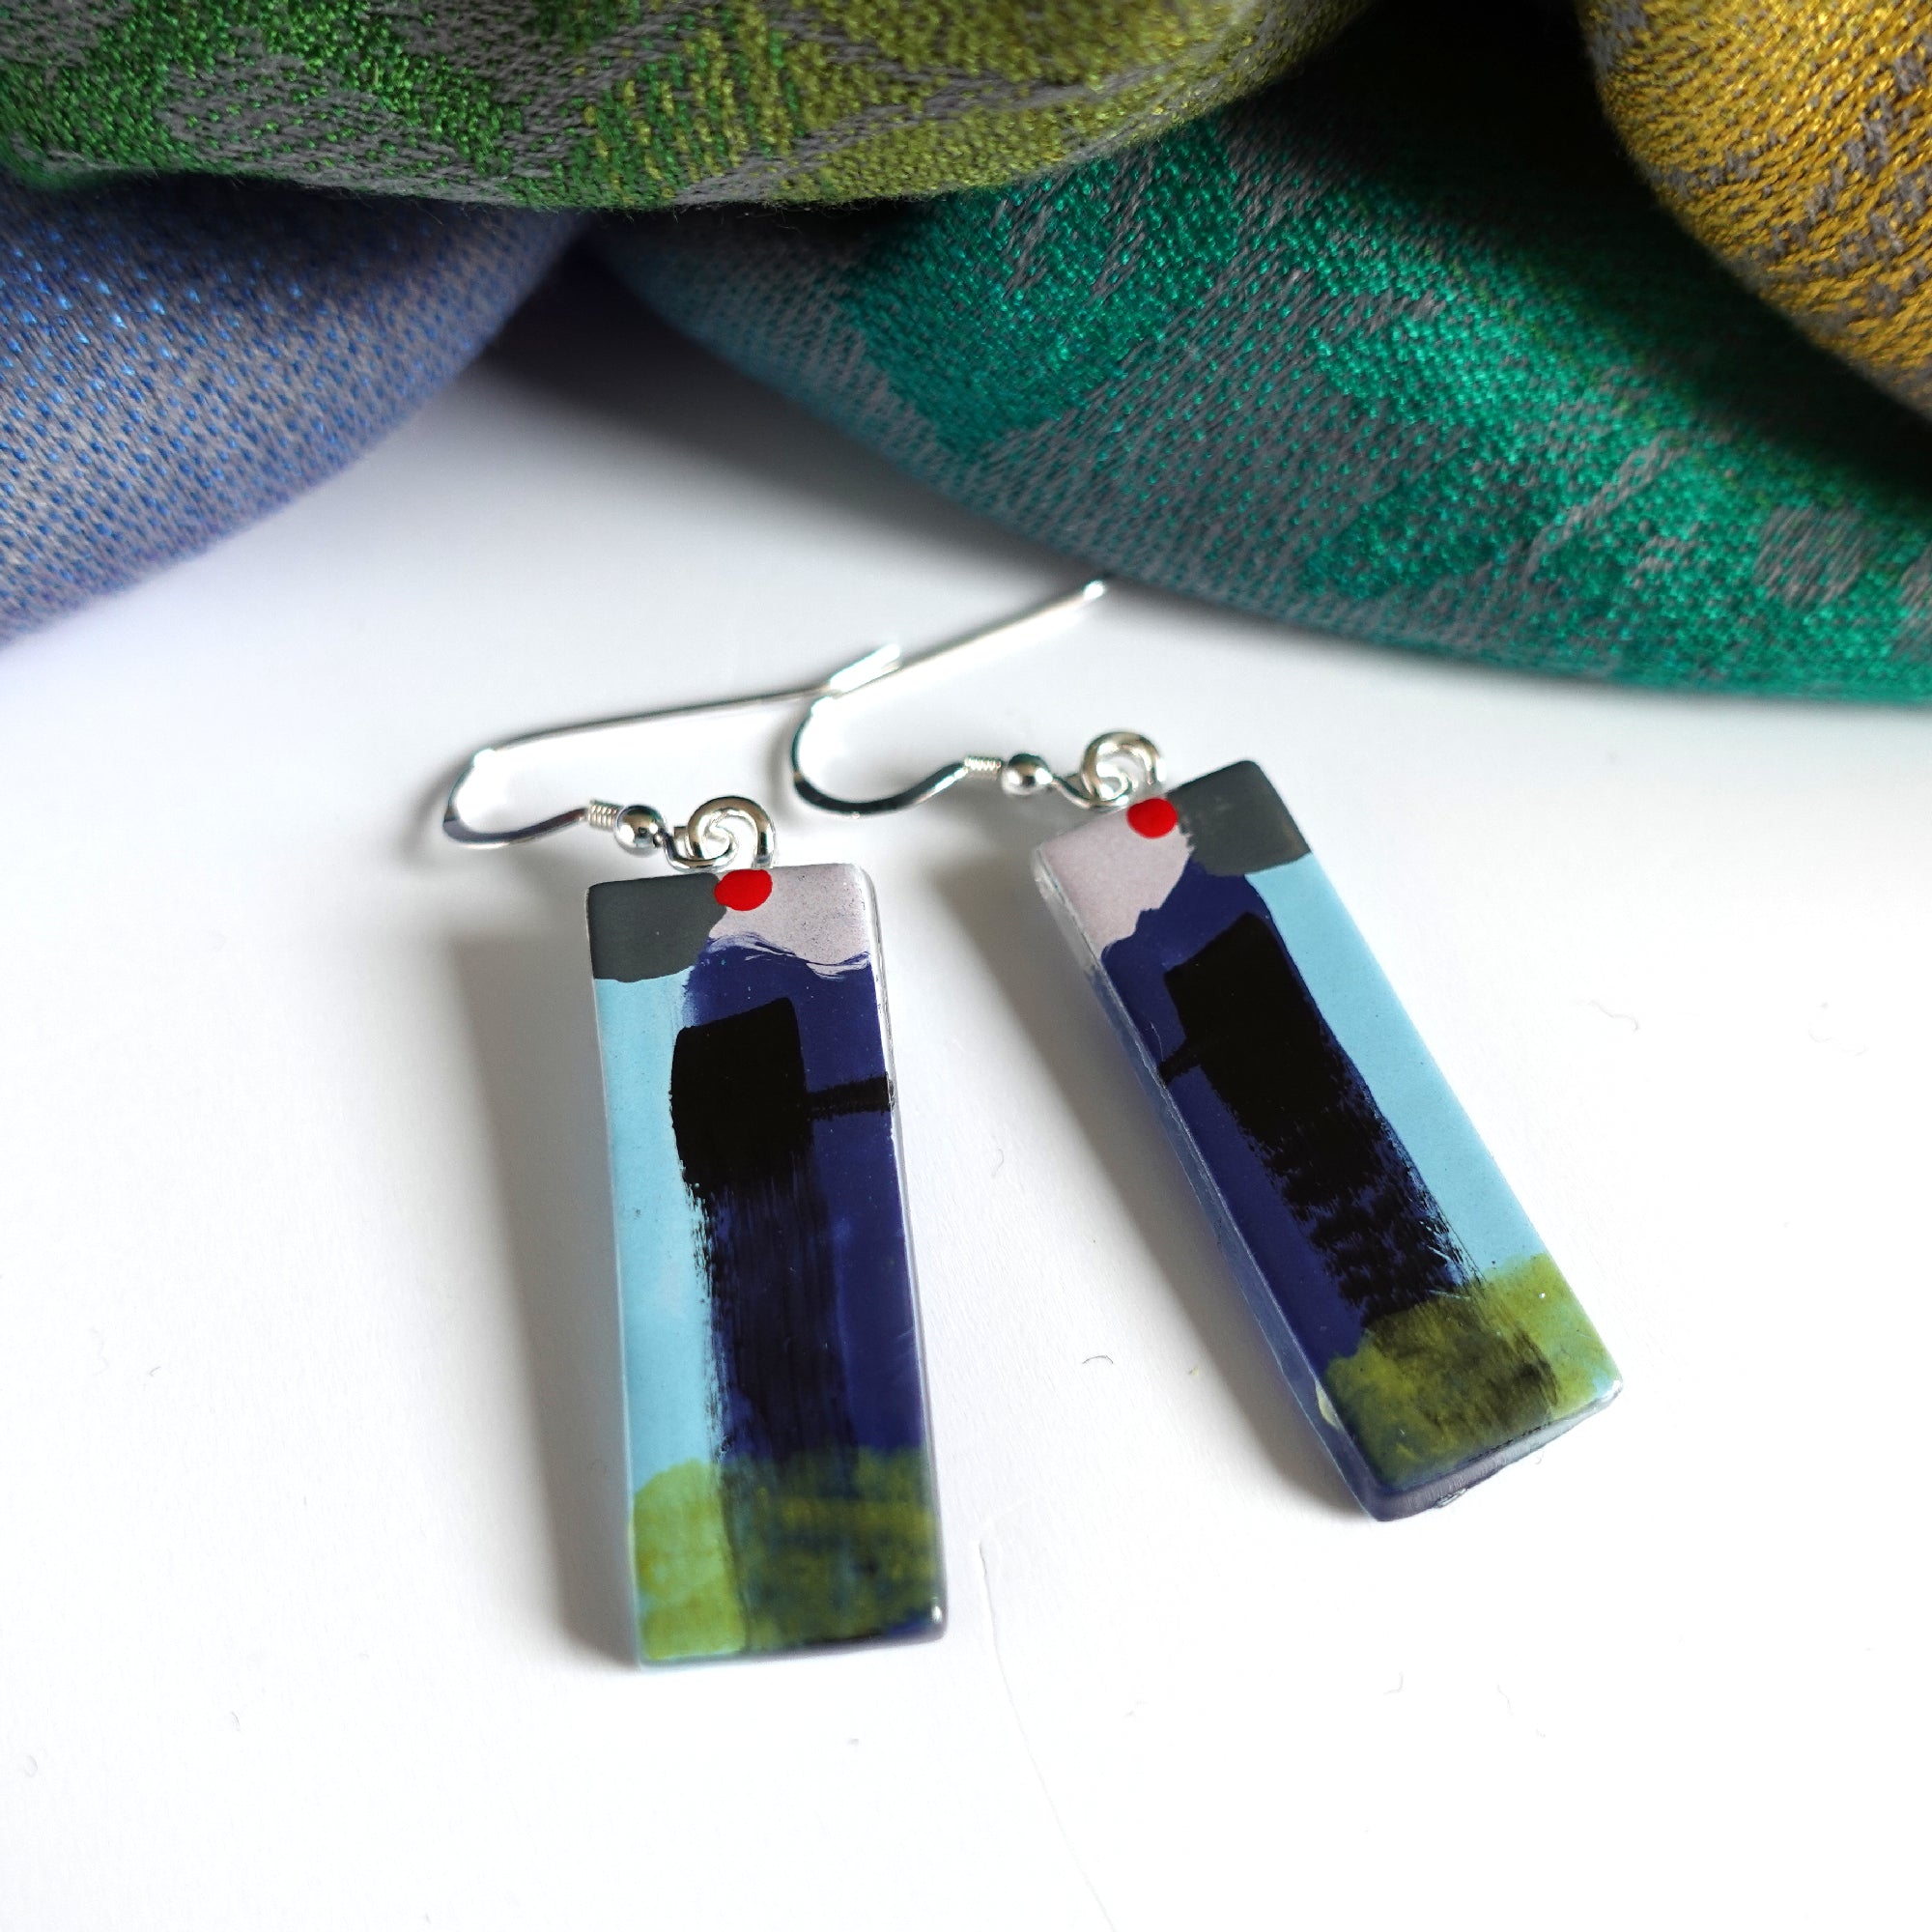 Bright abstract fused glass earrings in navy lilac and blue with red dot to high light. Sterling silver ear wires. 35 x 12mm